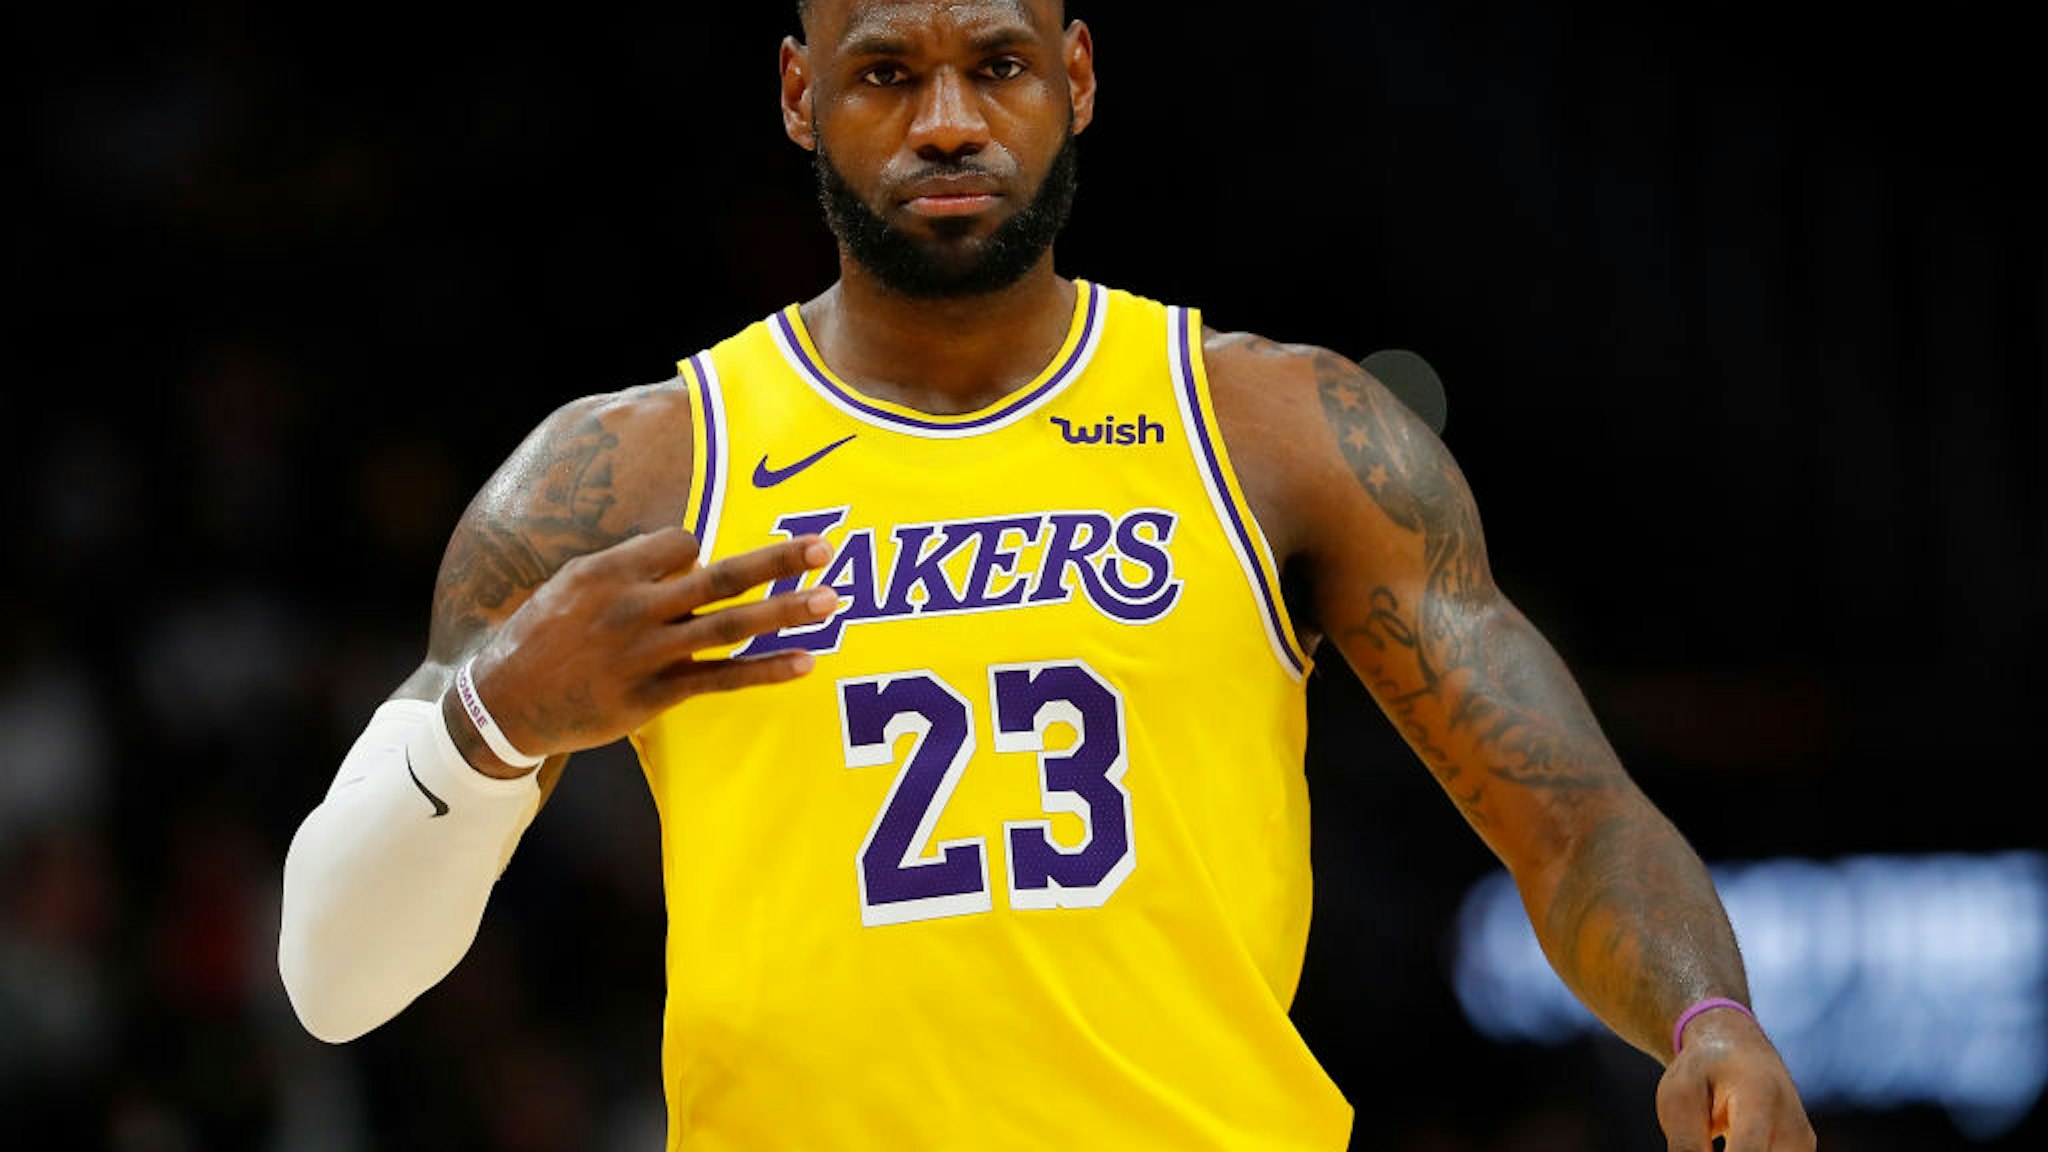 ATLANTA, GEORGIA - DECEMBER 15: LeBron James #23 of the Los Angeles Lakers reacts after hitting a three-point basket against the Atlanta Hawks in the second half at State Farm Arena on December 15, 2019 in Atlanta, Georgia. NOTE TO USER: User expressly acknowledges and agrees that, by downloading and/or using this photograph, user is consenting to the terms and conditions of the Getty Images License Agreement. (Photo by Kevin C. Cox/Getty Images)